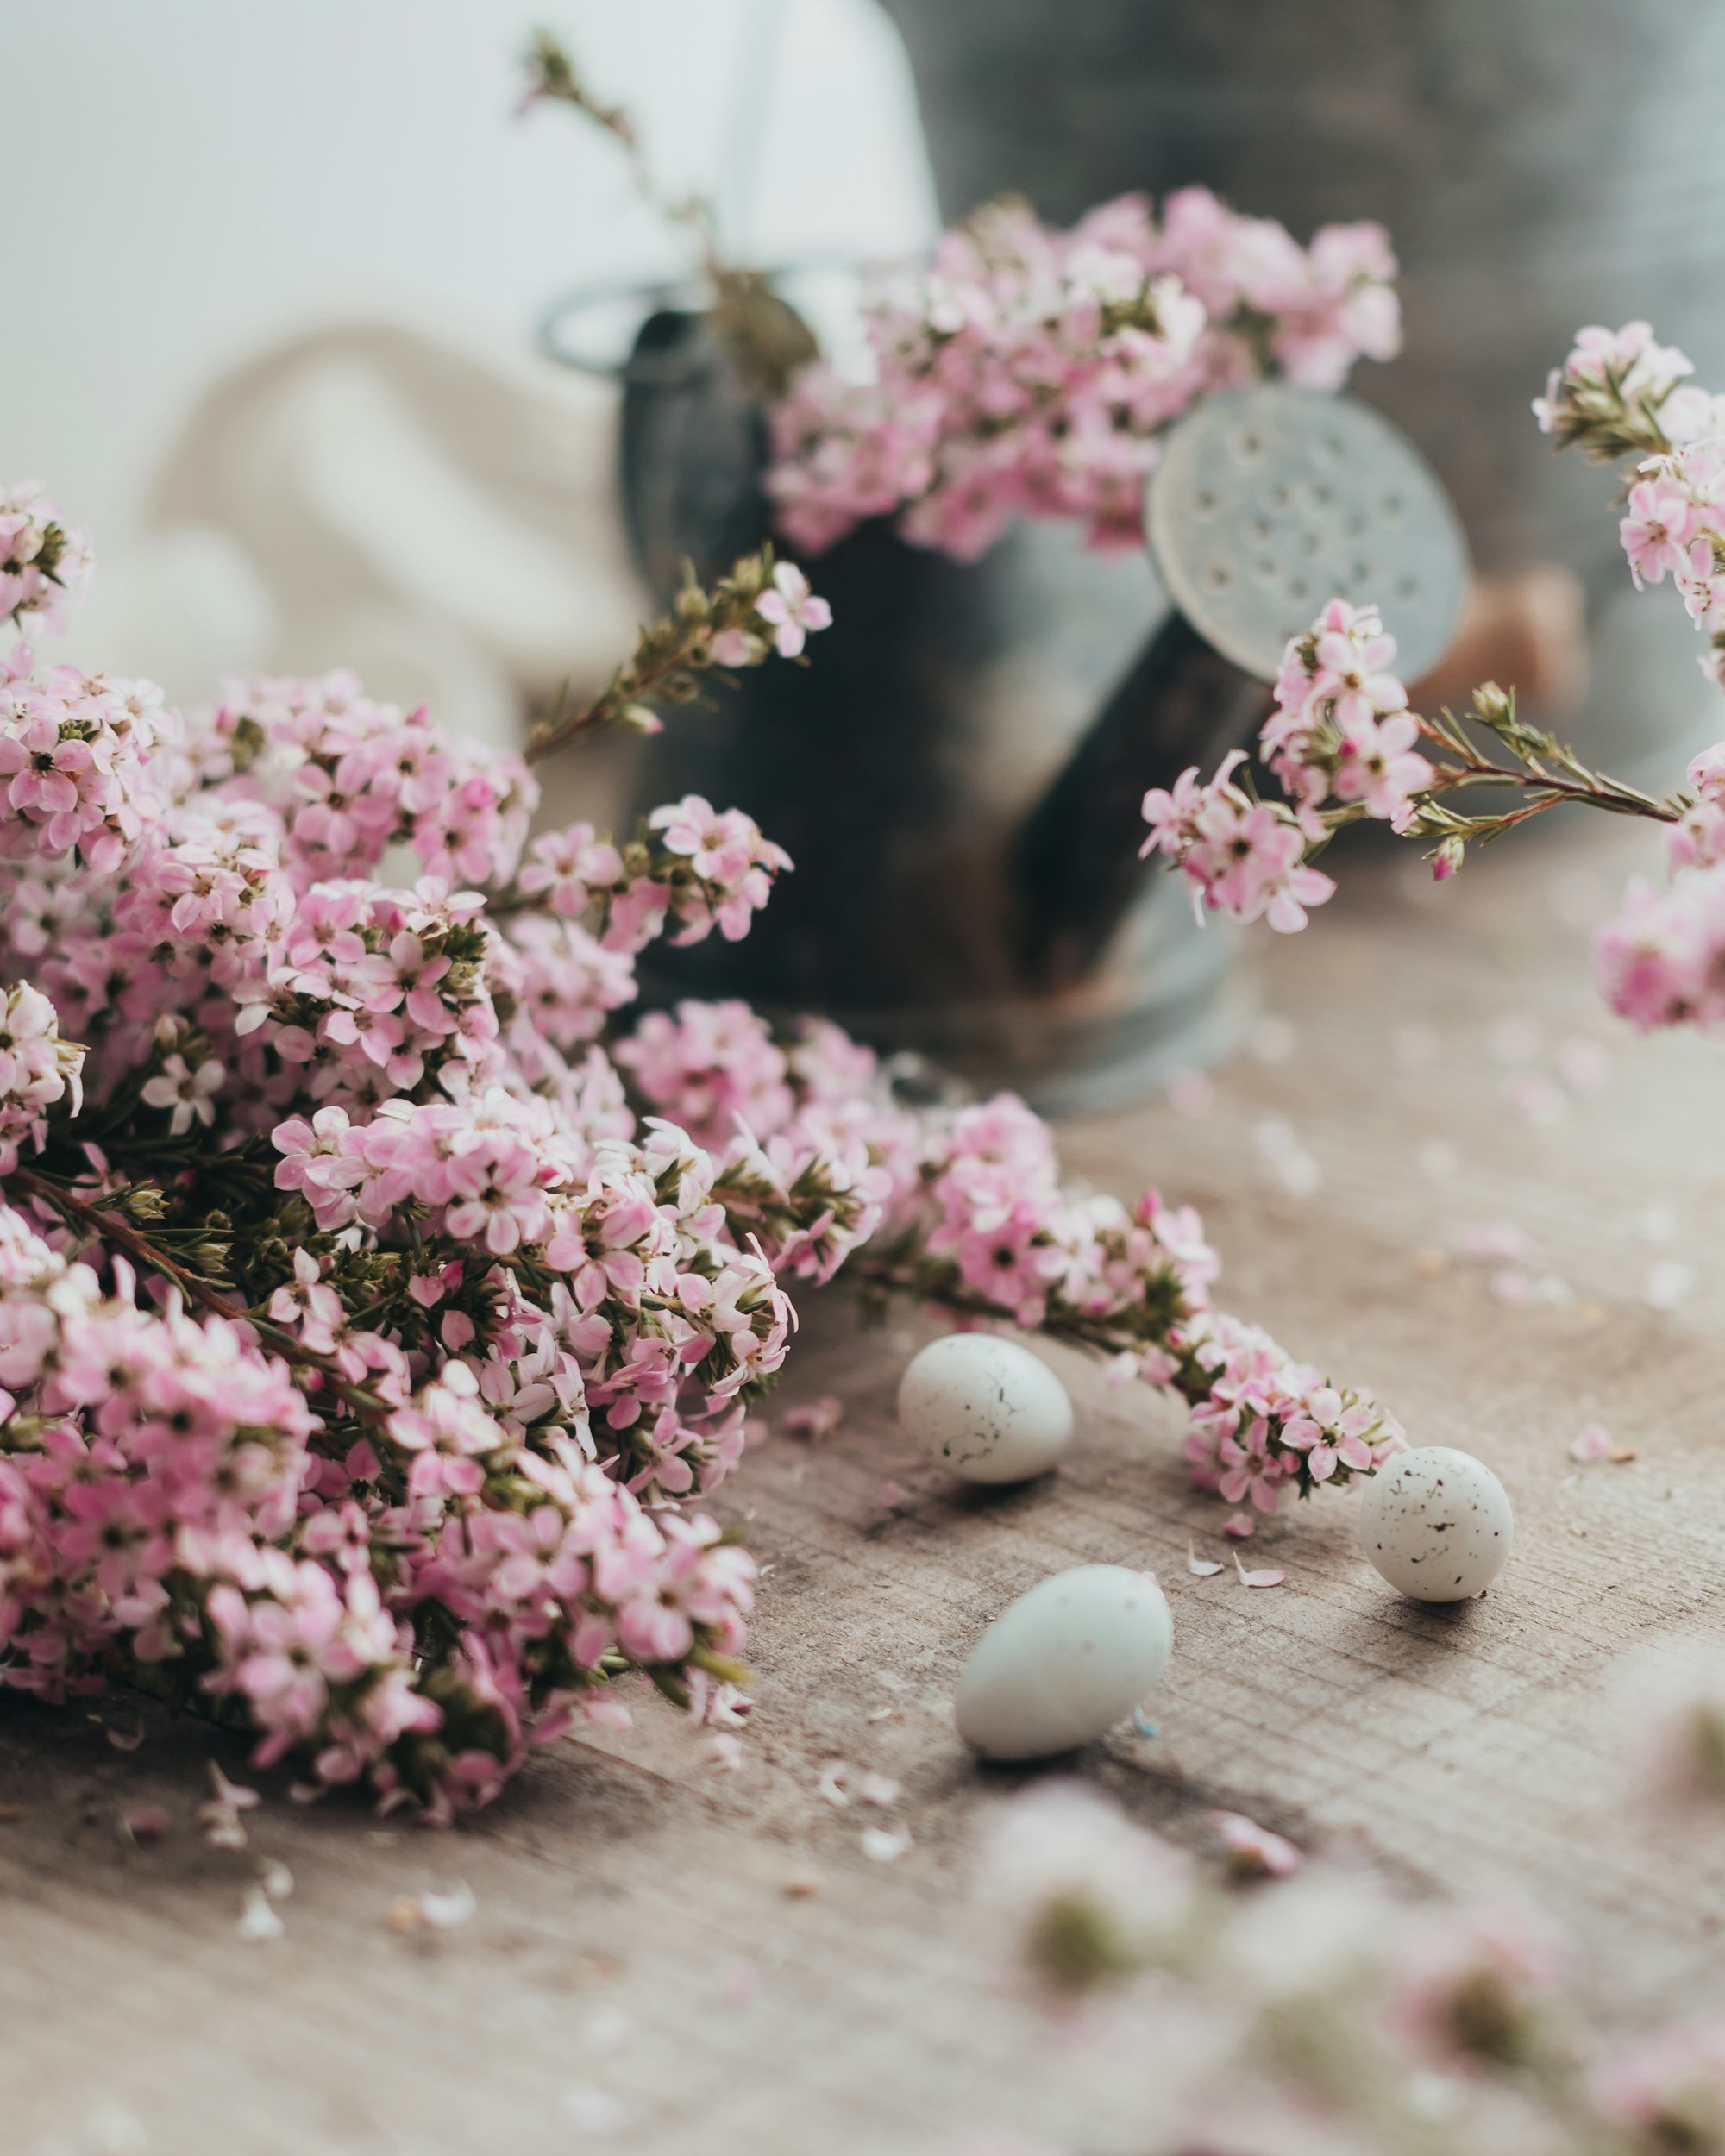 50+ Blissful Easter Spiritual Ideas to Elevate Your Celebration